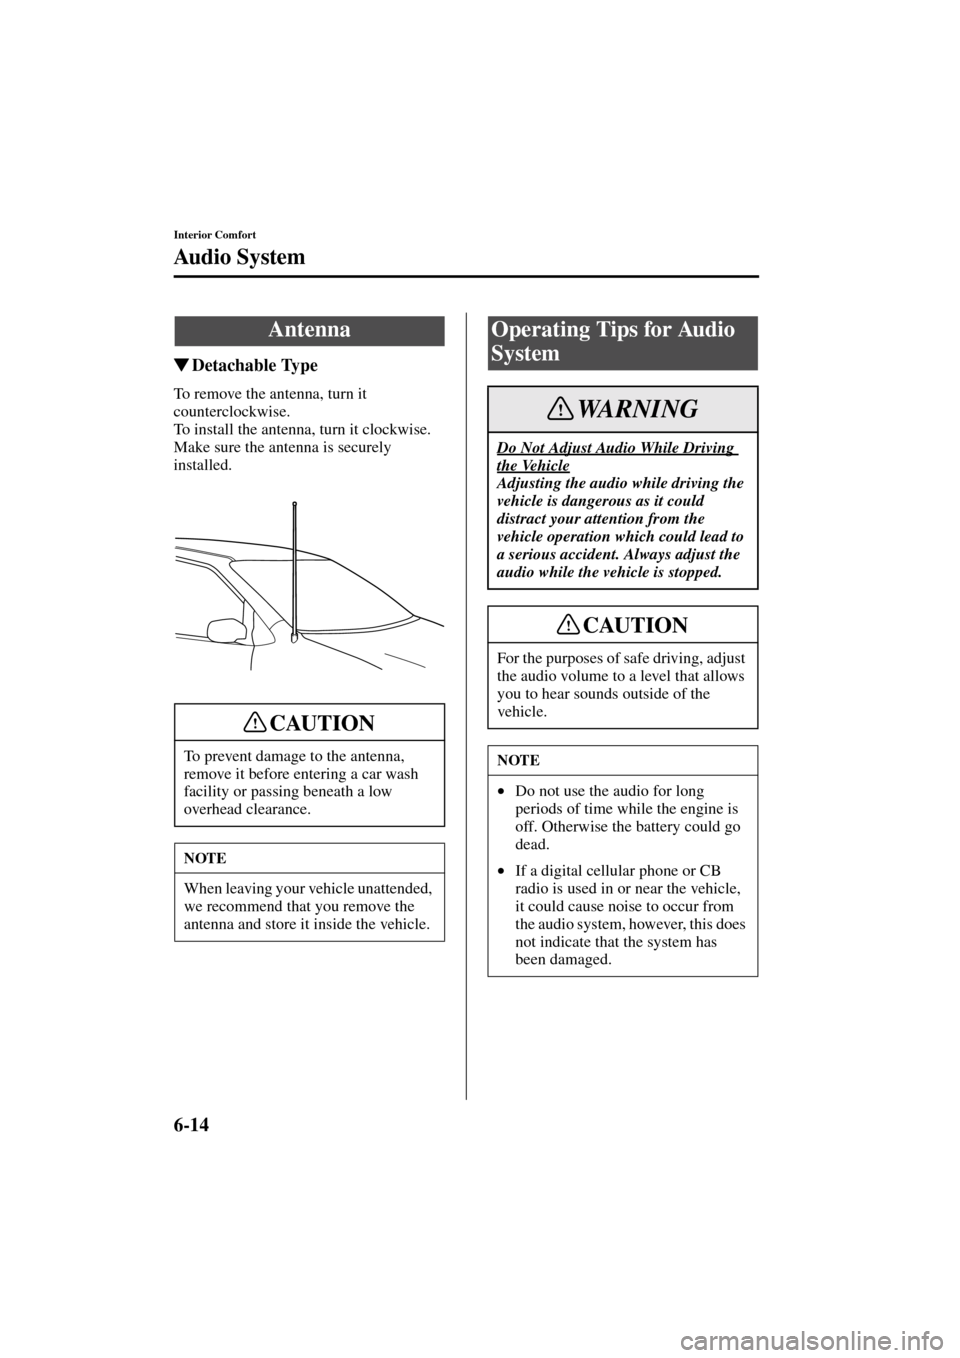 MAZDA MODEL MPV 2004  Owners Manual (in English) 6-14
Interior Comfort
Form No. 8S06-EA-03H
Audio System
Detachable Type
To remove the antenna, turn it 
counterclockwise.
To install the antenna, turn it clockwise.
Make sure the antenna is securely 